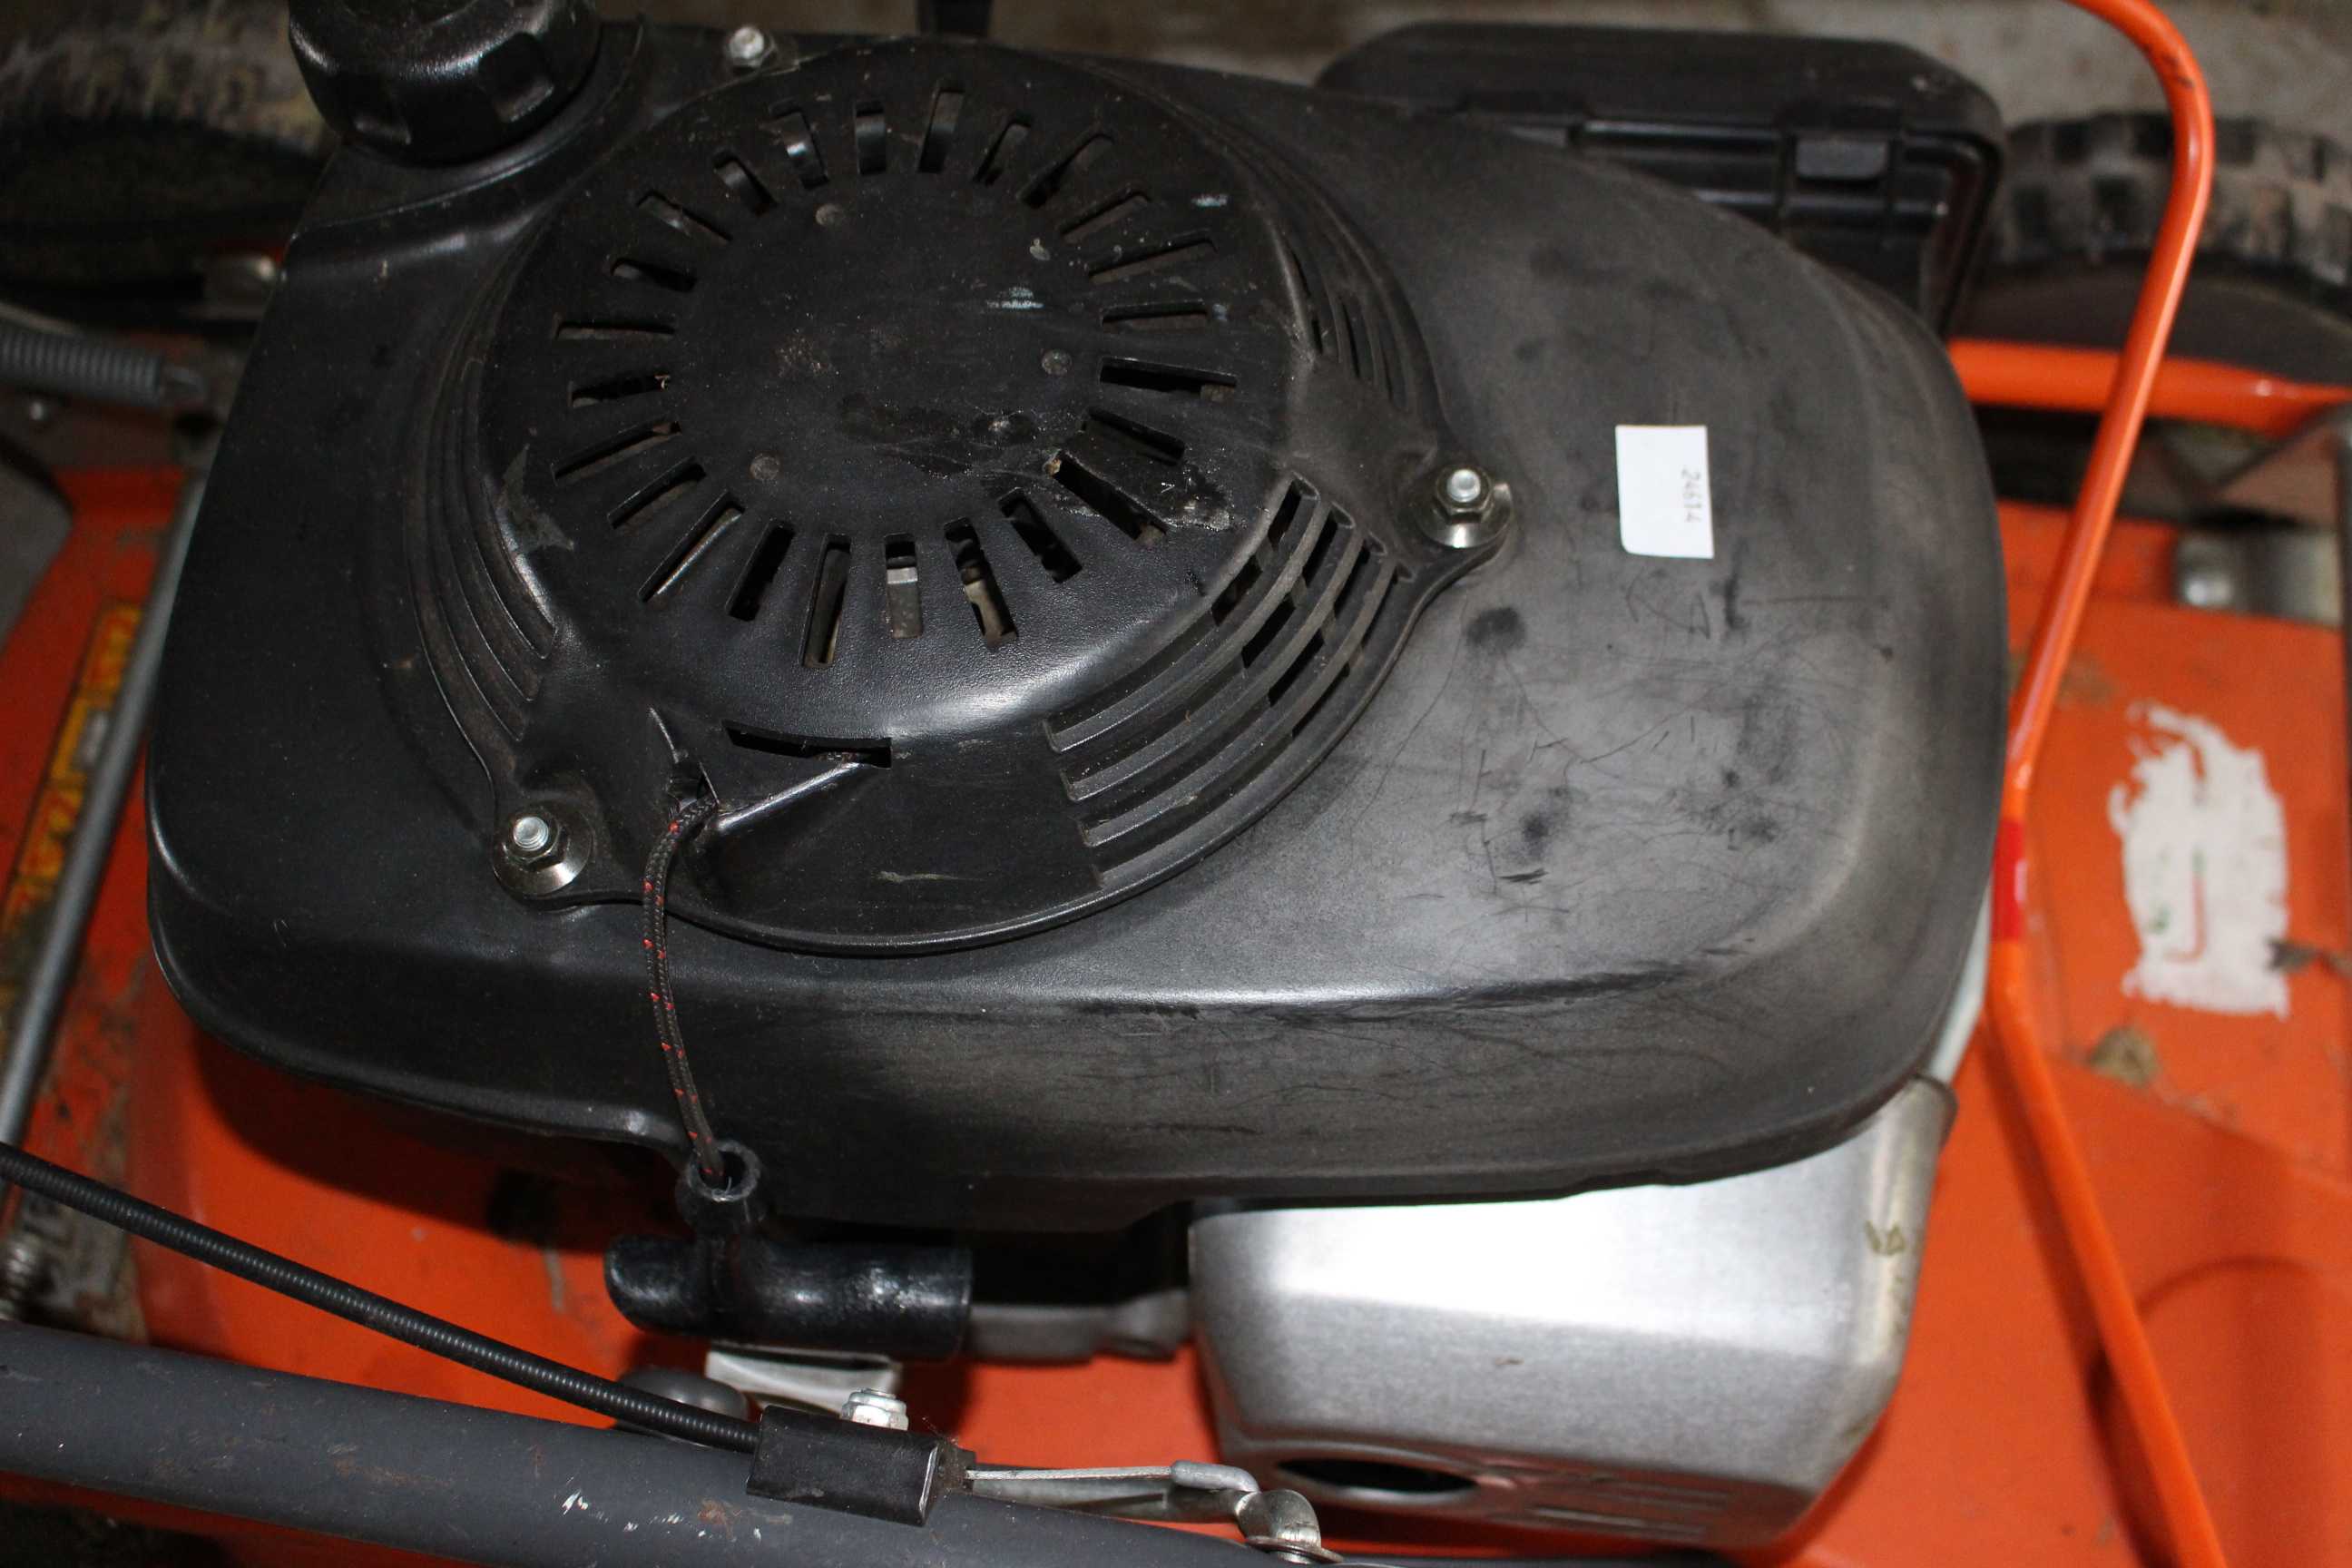 Husqvarna pull start petrol lawn mower with large cutting area. (selling as untested) - Image 4 of 4